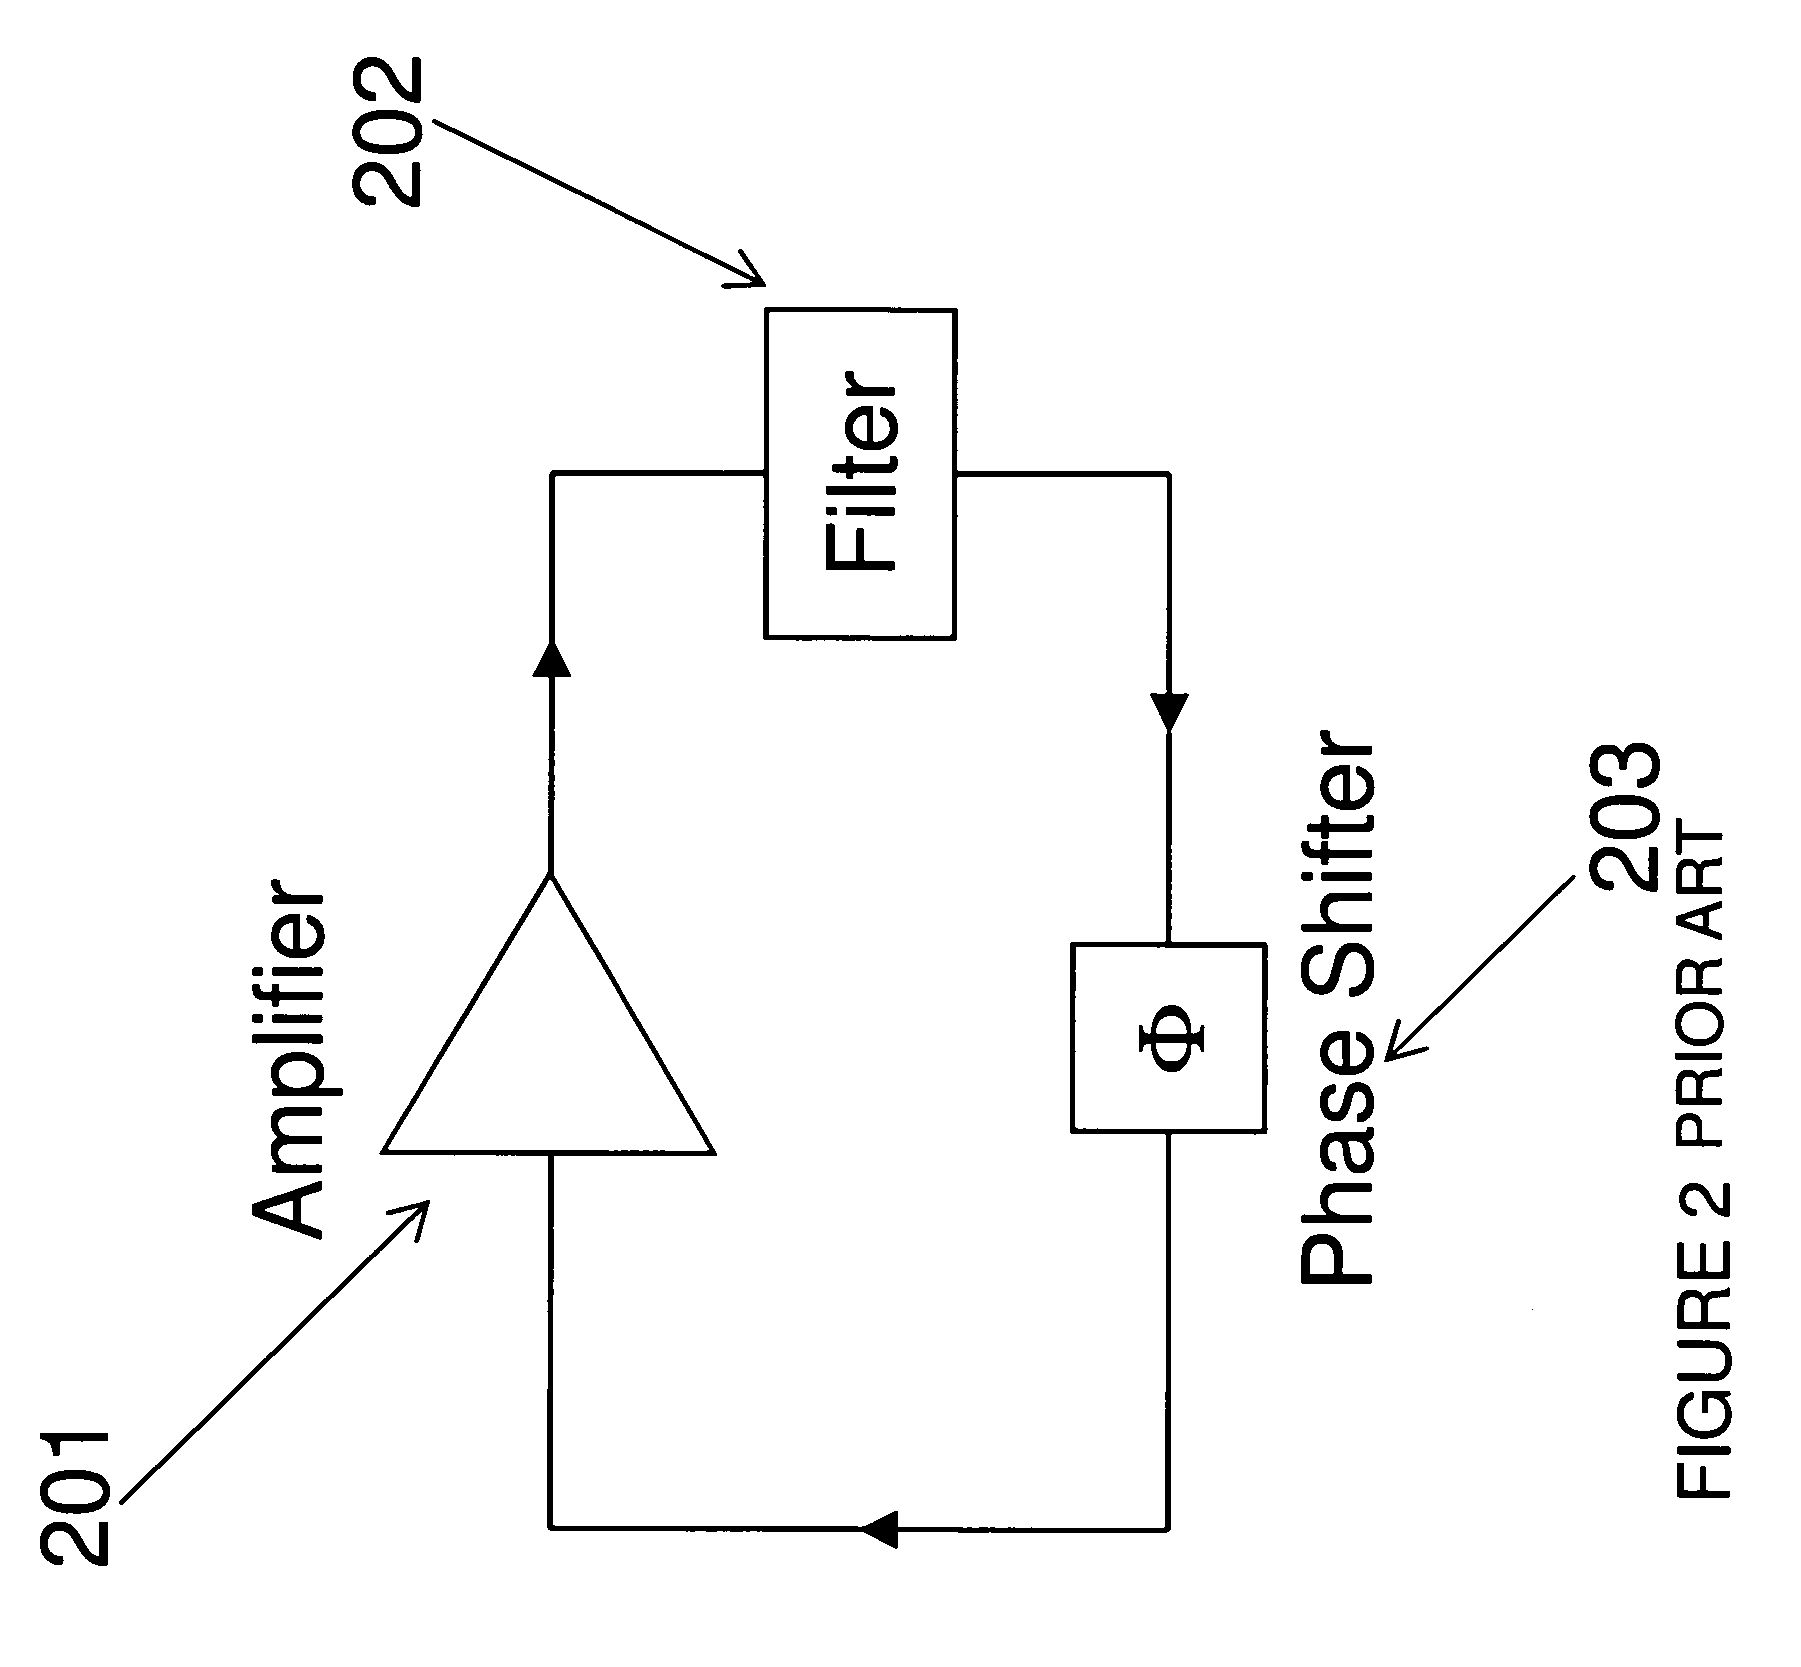 Method and system for using a MEMS structure as a timing source